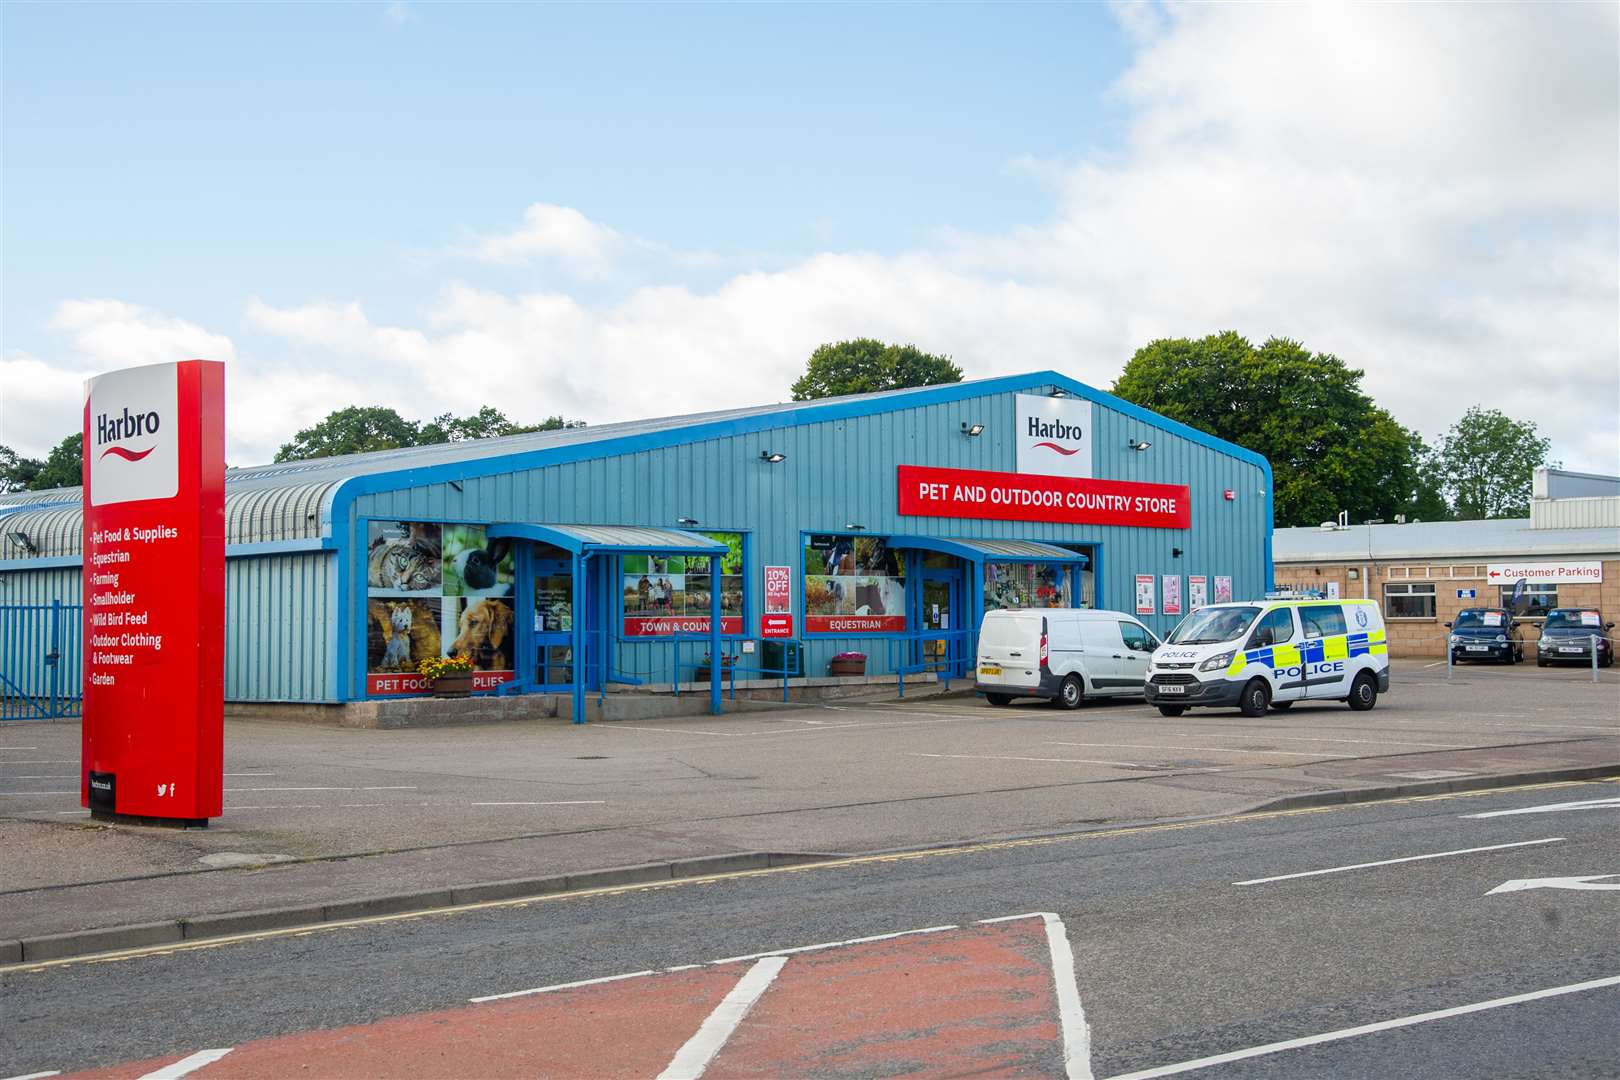 A police presence remains at Harbro Pet & Outdoor Country Store on Edgar Road, Elgin, after a break-in overnight...Picture: Daniel Forsyth..